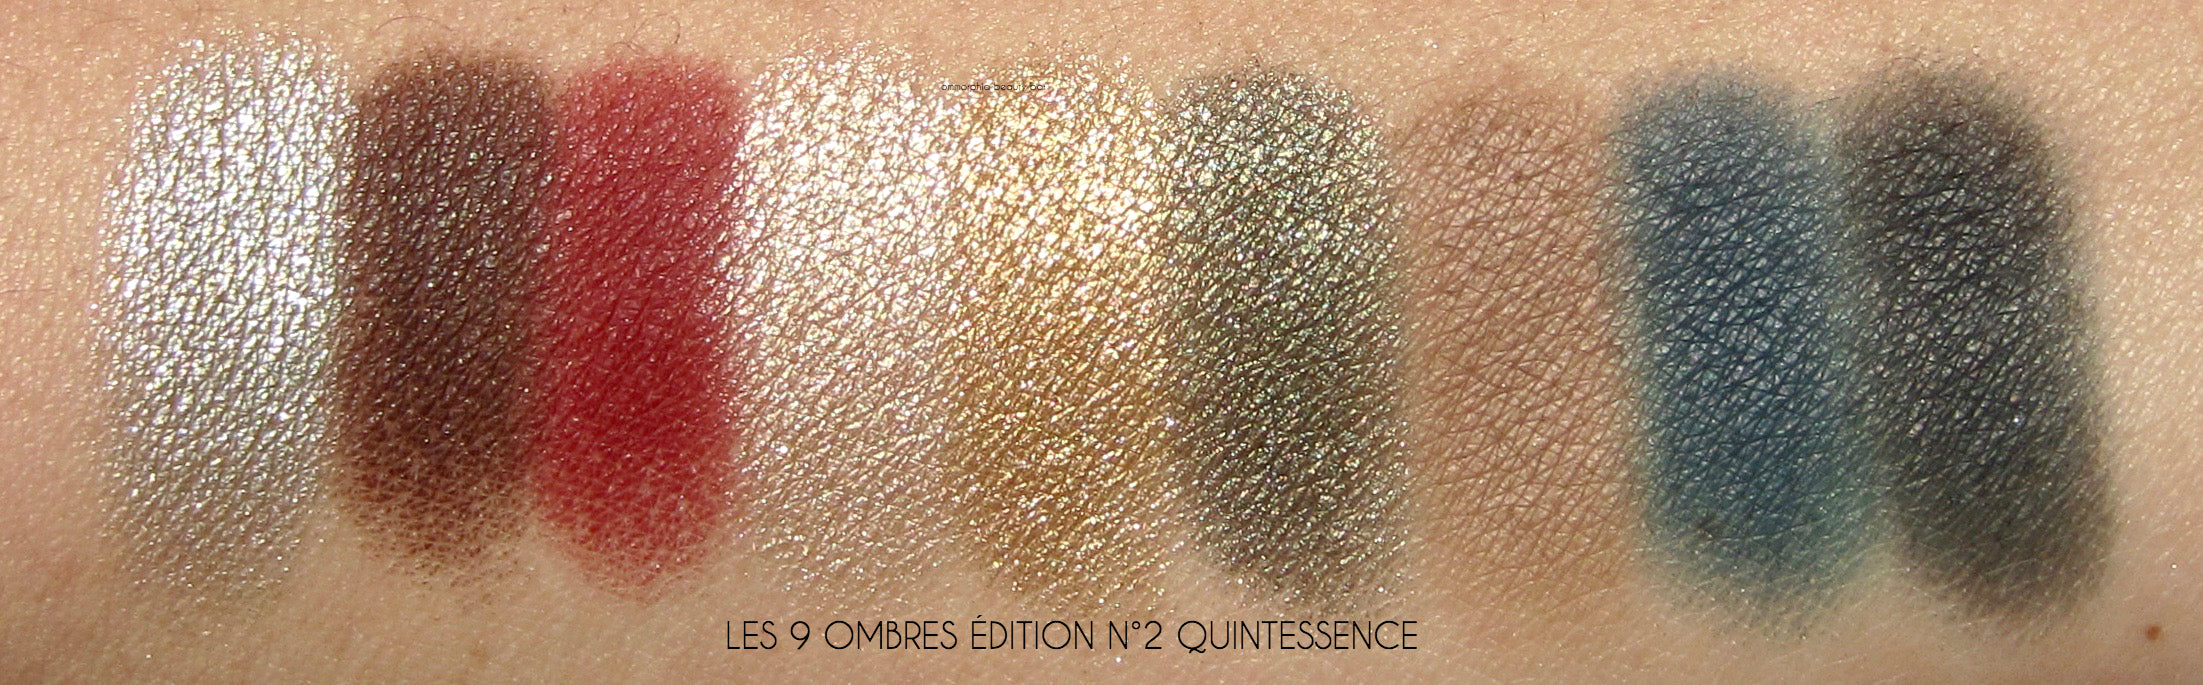 W. Les 9 Ombres Eye Shadow Collection Edition No 2 Quintessence 6.3 Gr